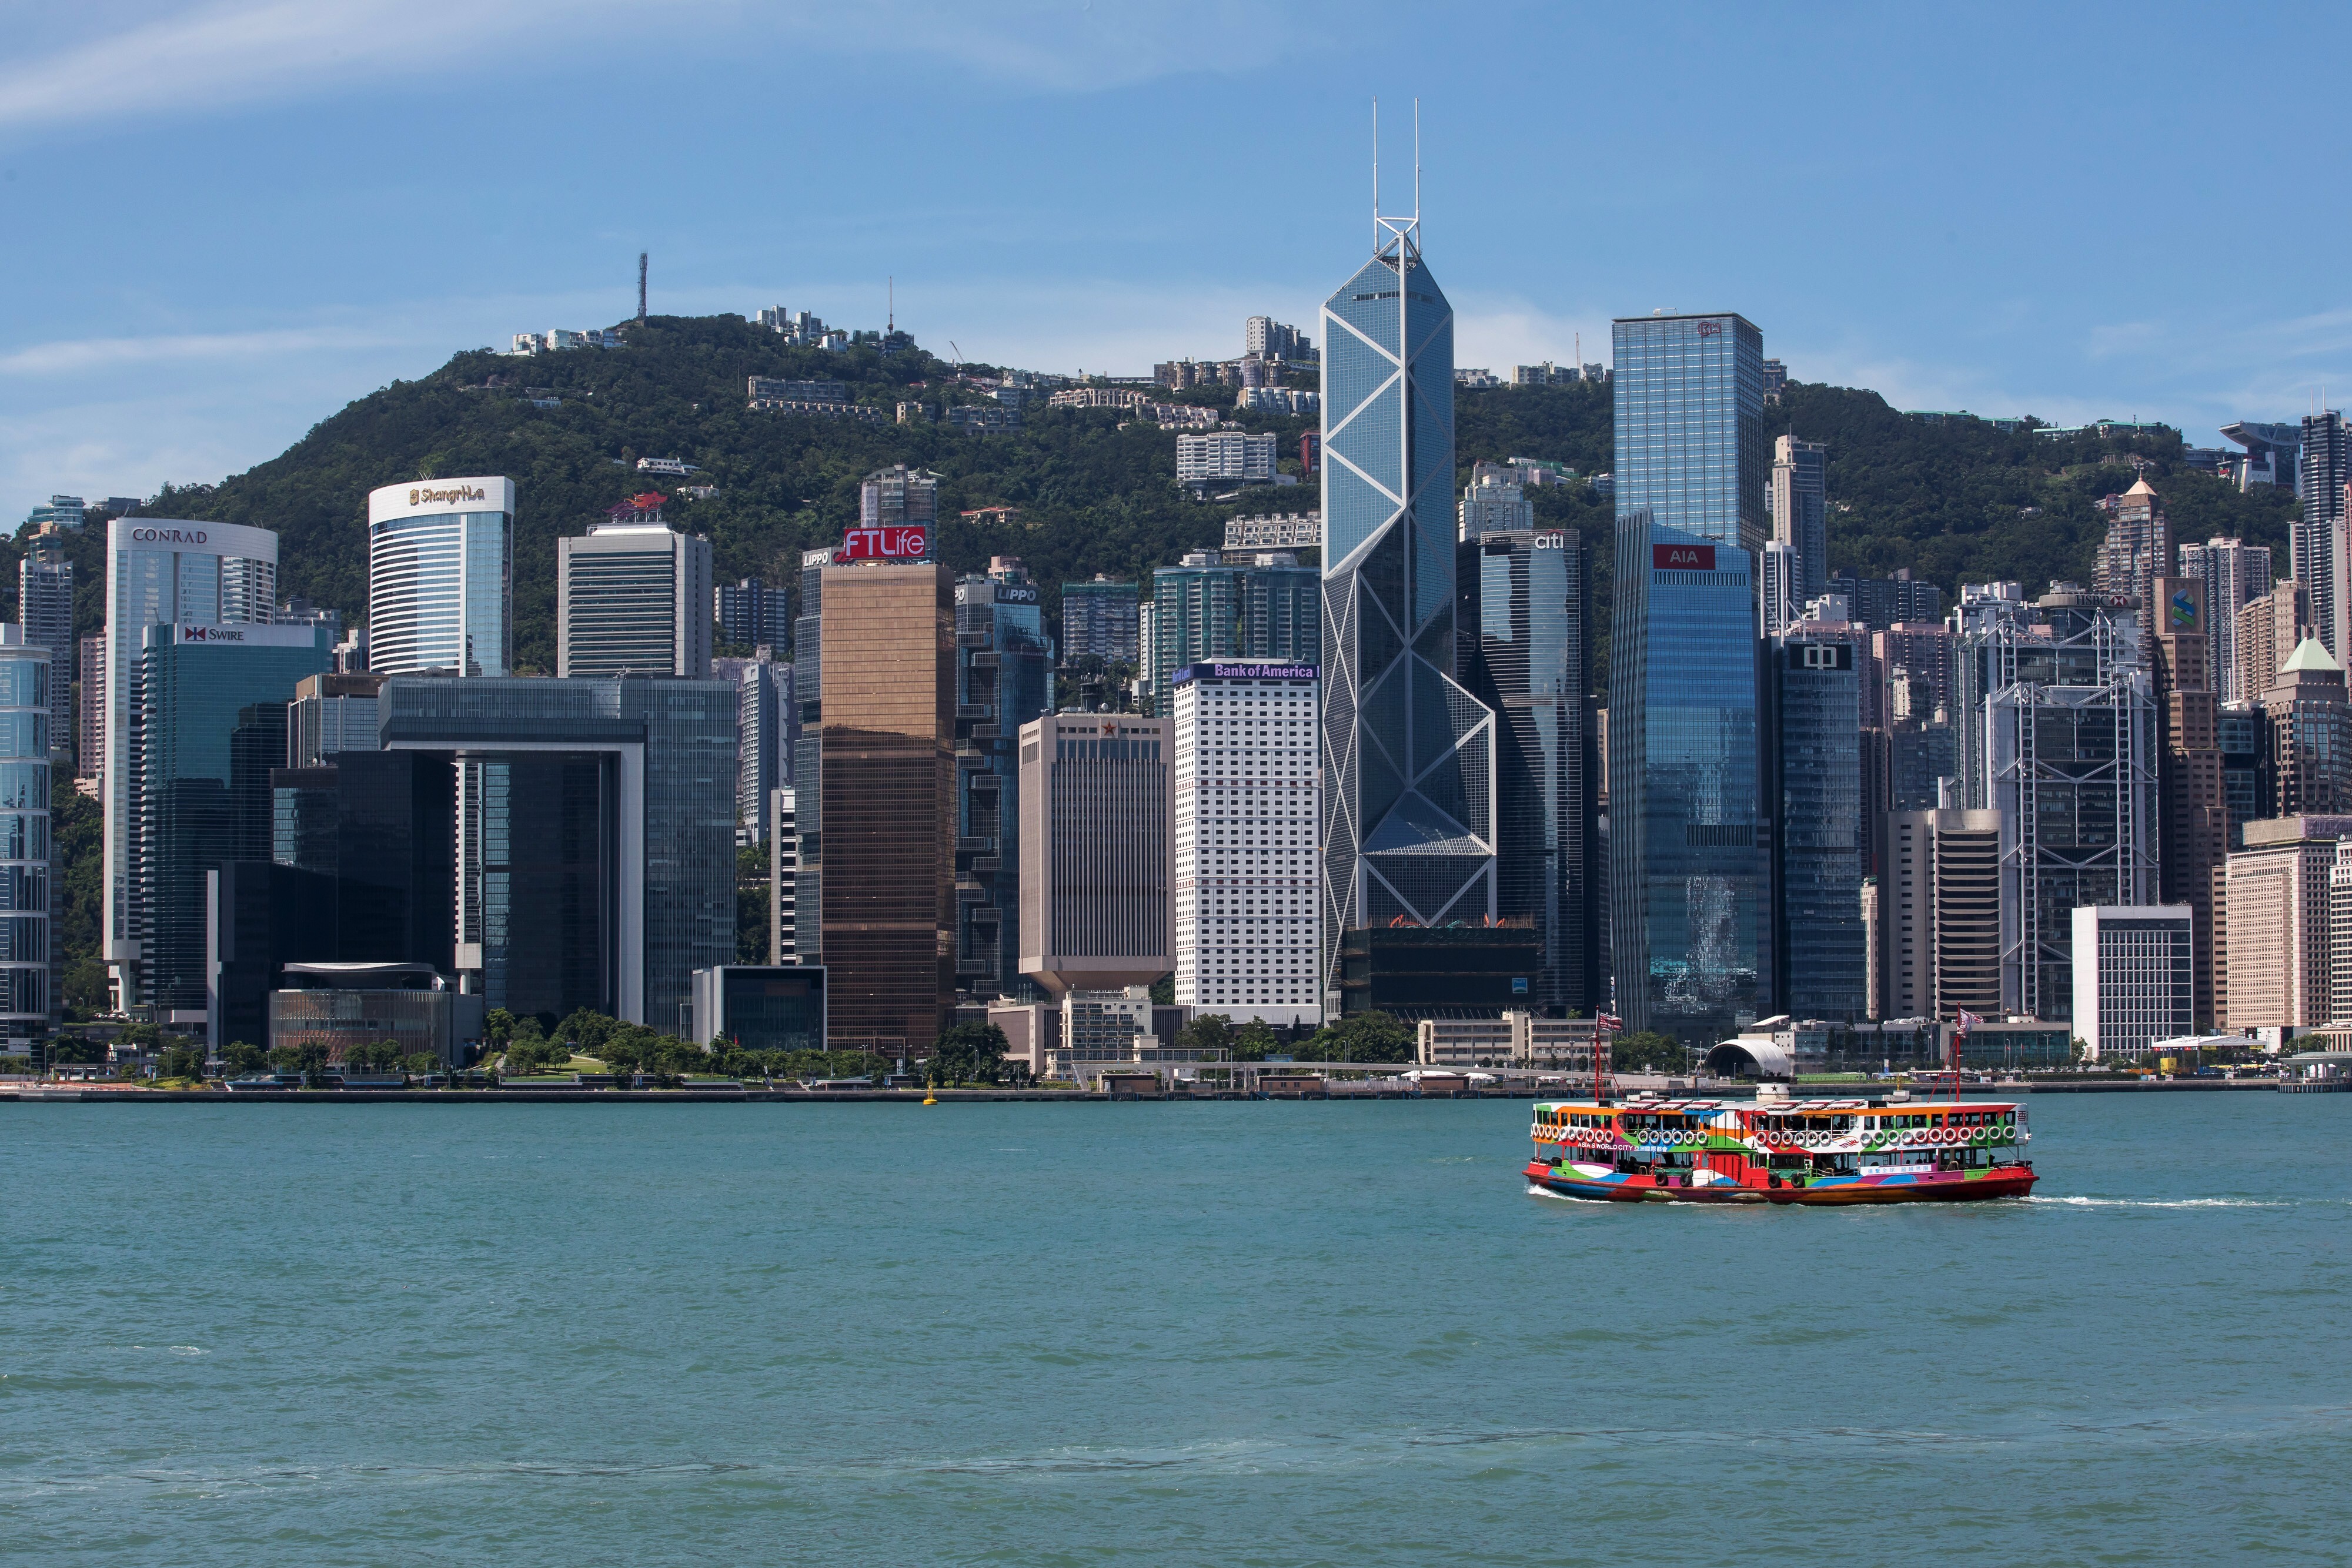 While there have been reports of Hongkongers leaving in the wake of the national security law, many foreign residents are choosing to remain.. Photo: Bloomberg